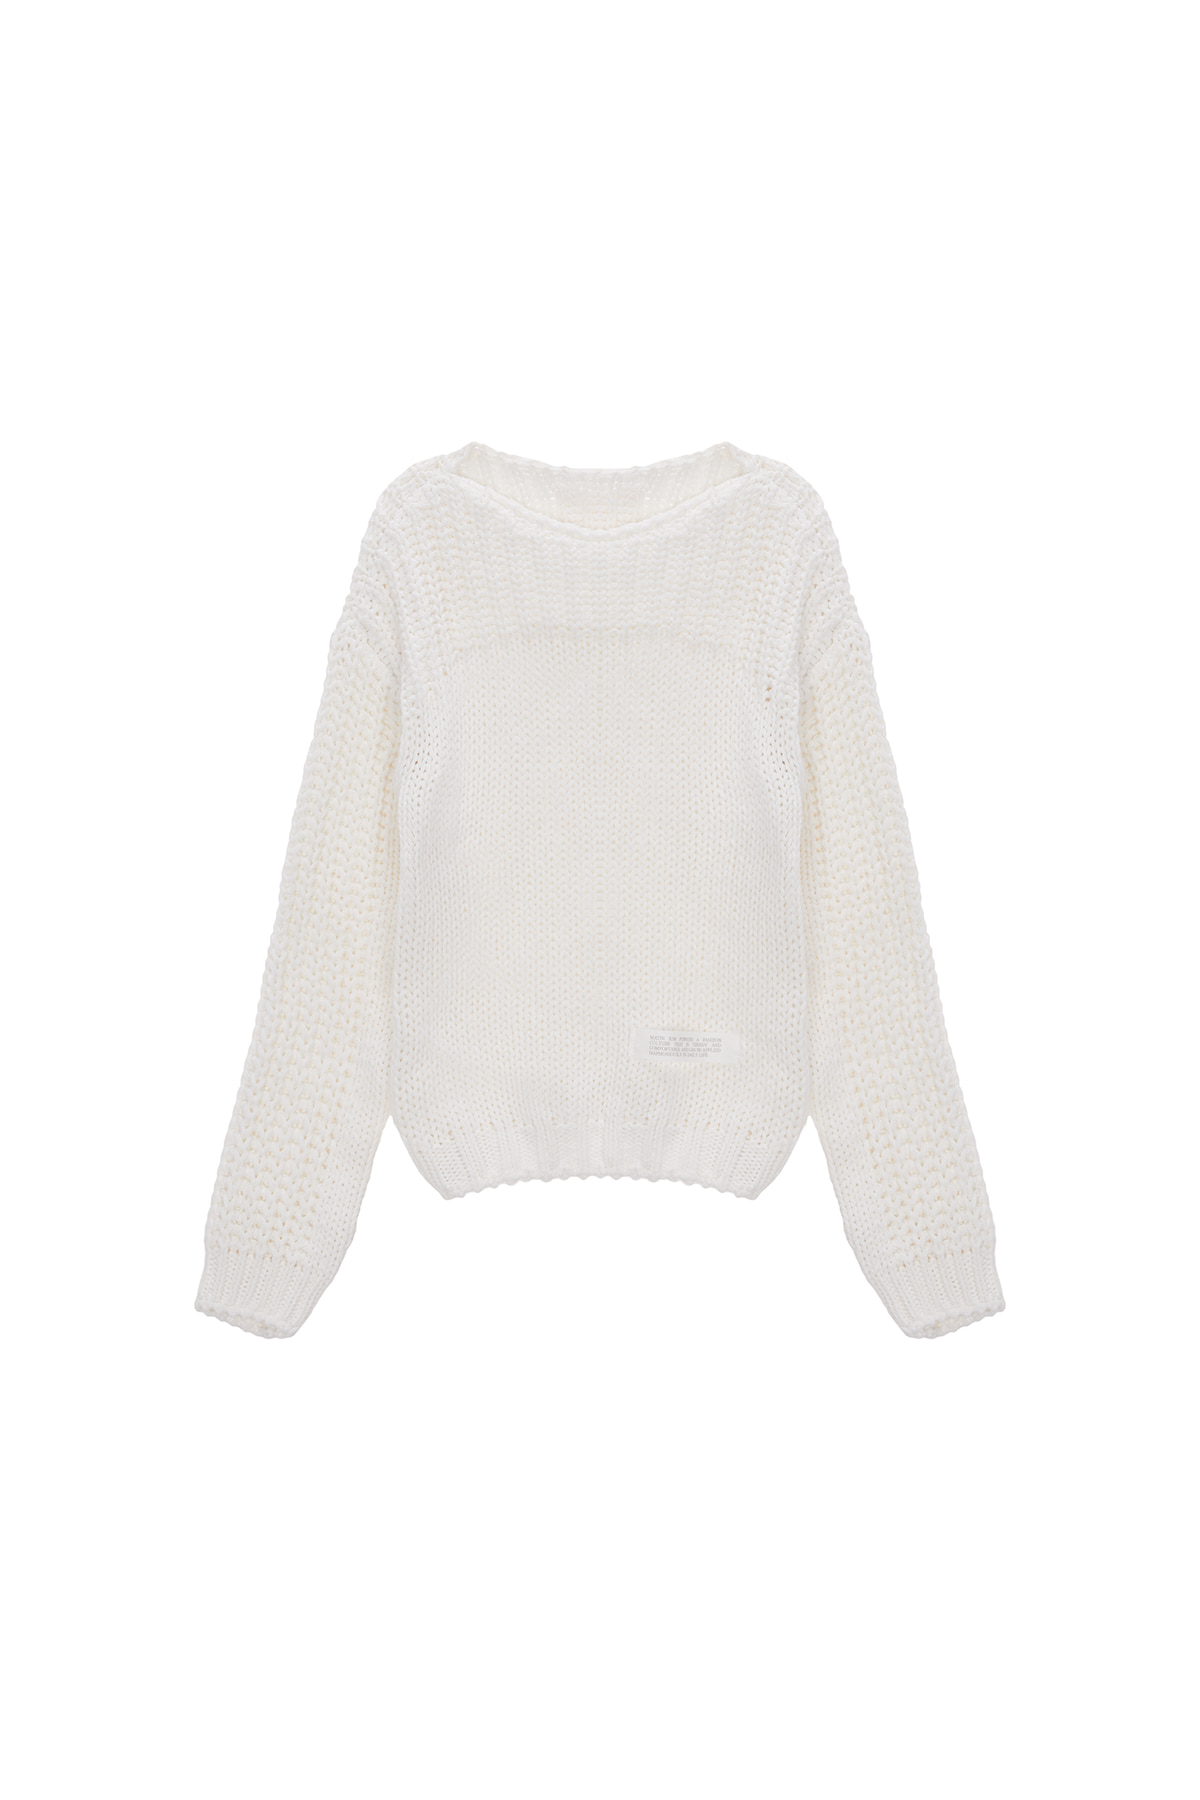 BRAID TEXTURE KNIT PULLOVER IN WHITE